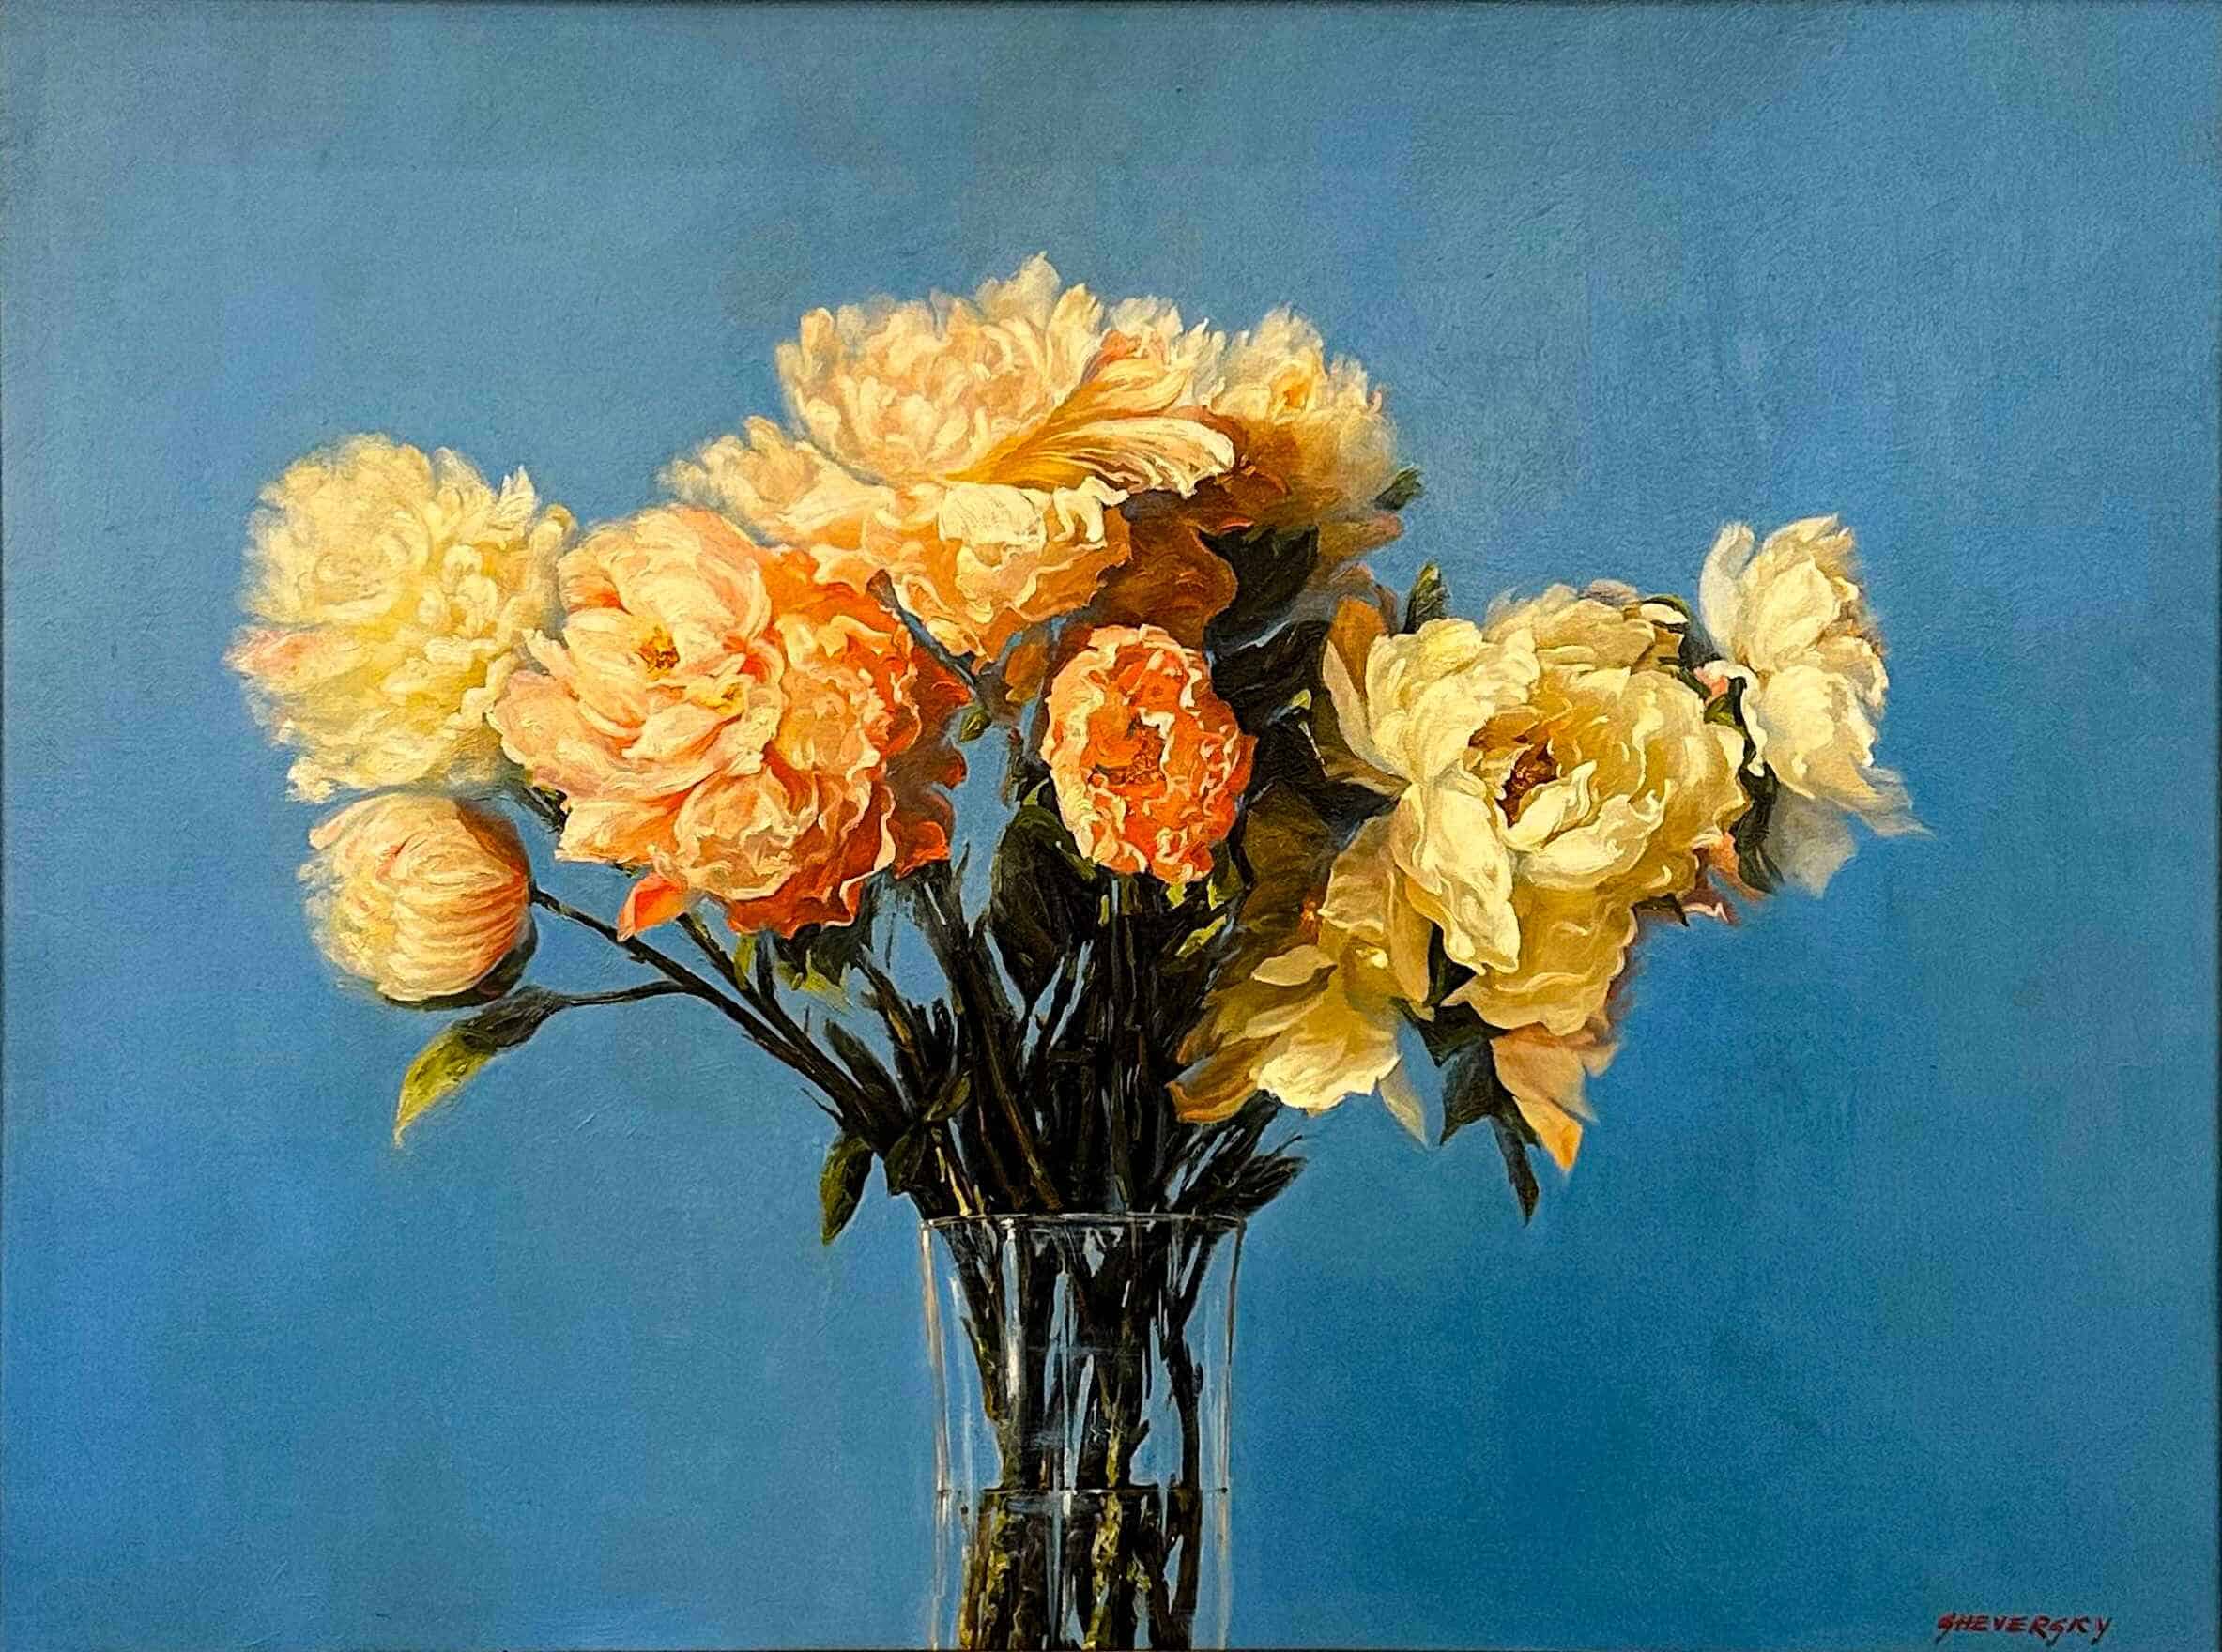 Contemporary art. Title: Peonies, Oil on Canvas, 30 x 40 in by Canadian artist Alexander Sheversky.